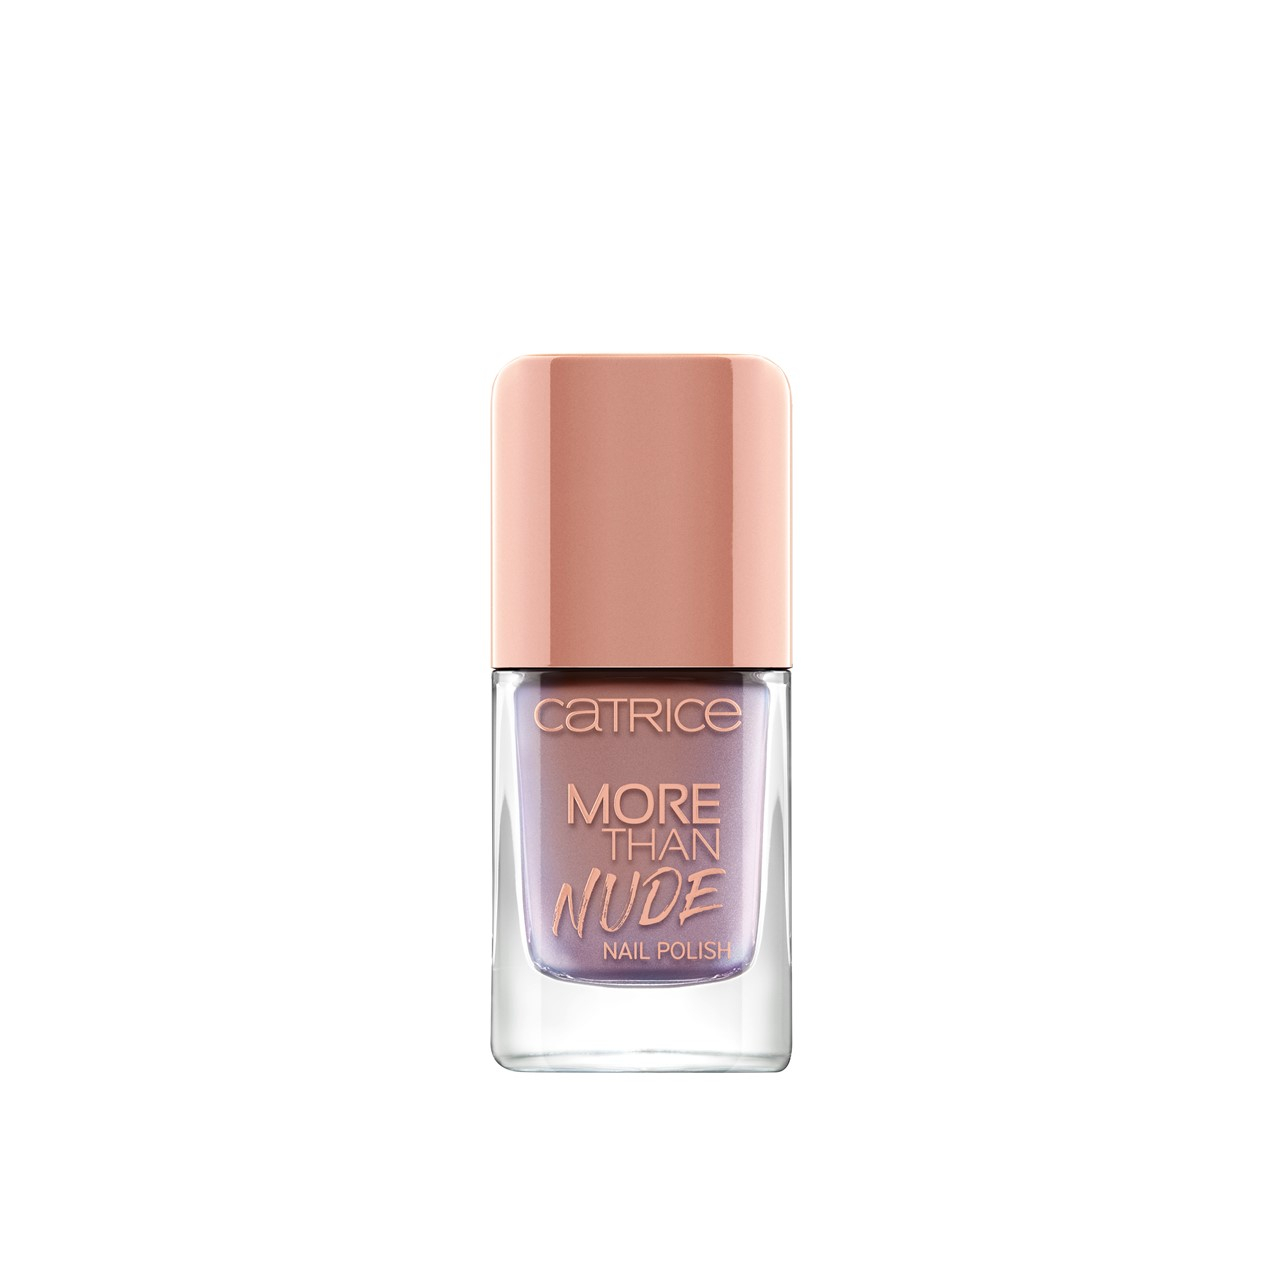 Catrice More Than Nude Nail Polish 09 Brownie Not Blondie! 10.5ml